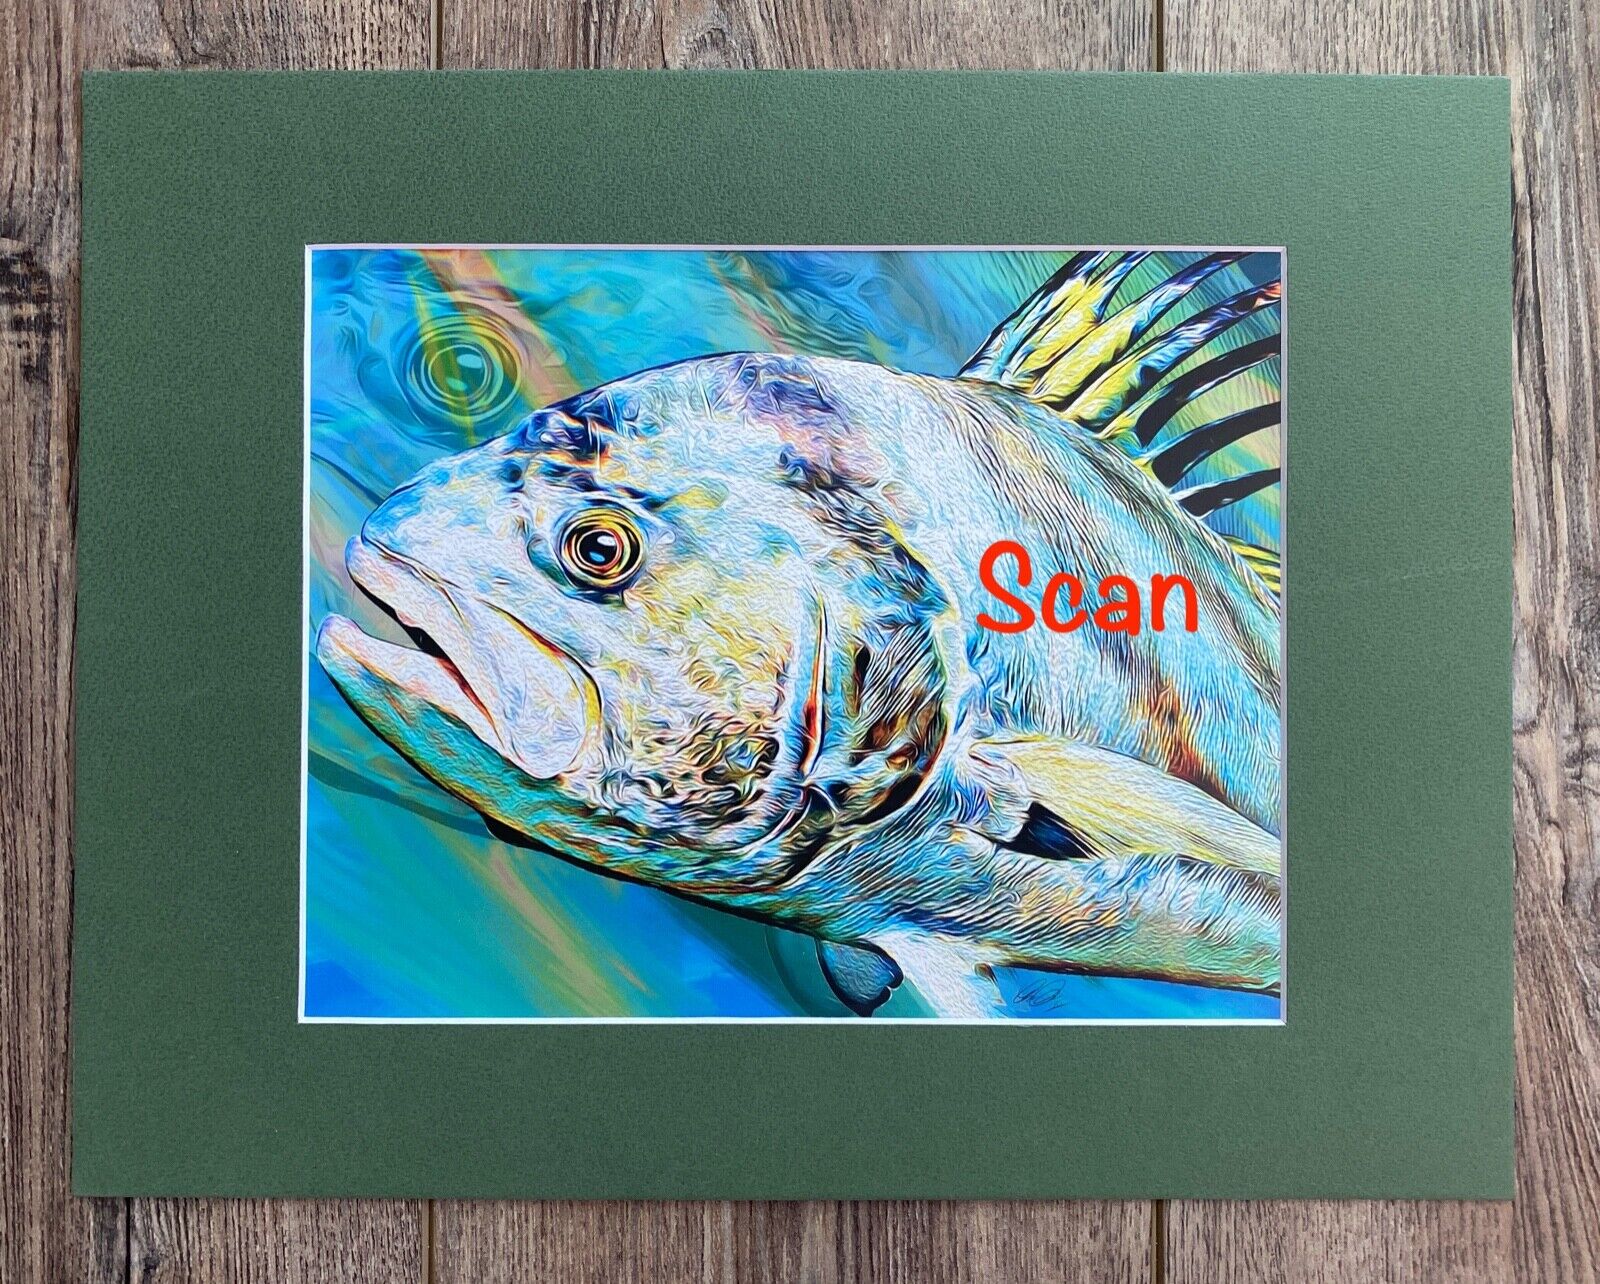 8x10 Ed Luterio Fishing Fish Print "roosterfish" Matted To 11x14 "you Pick"